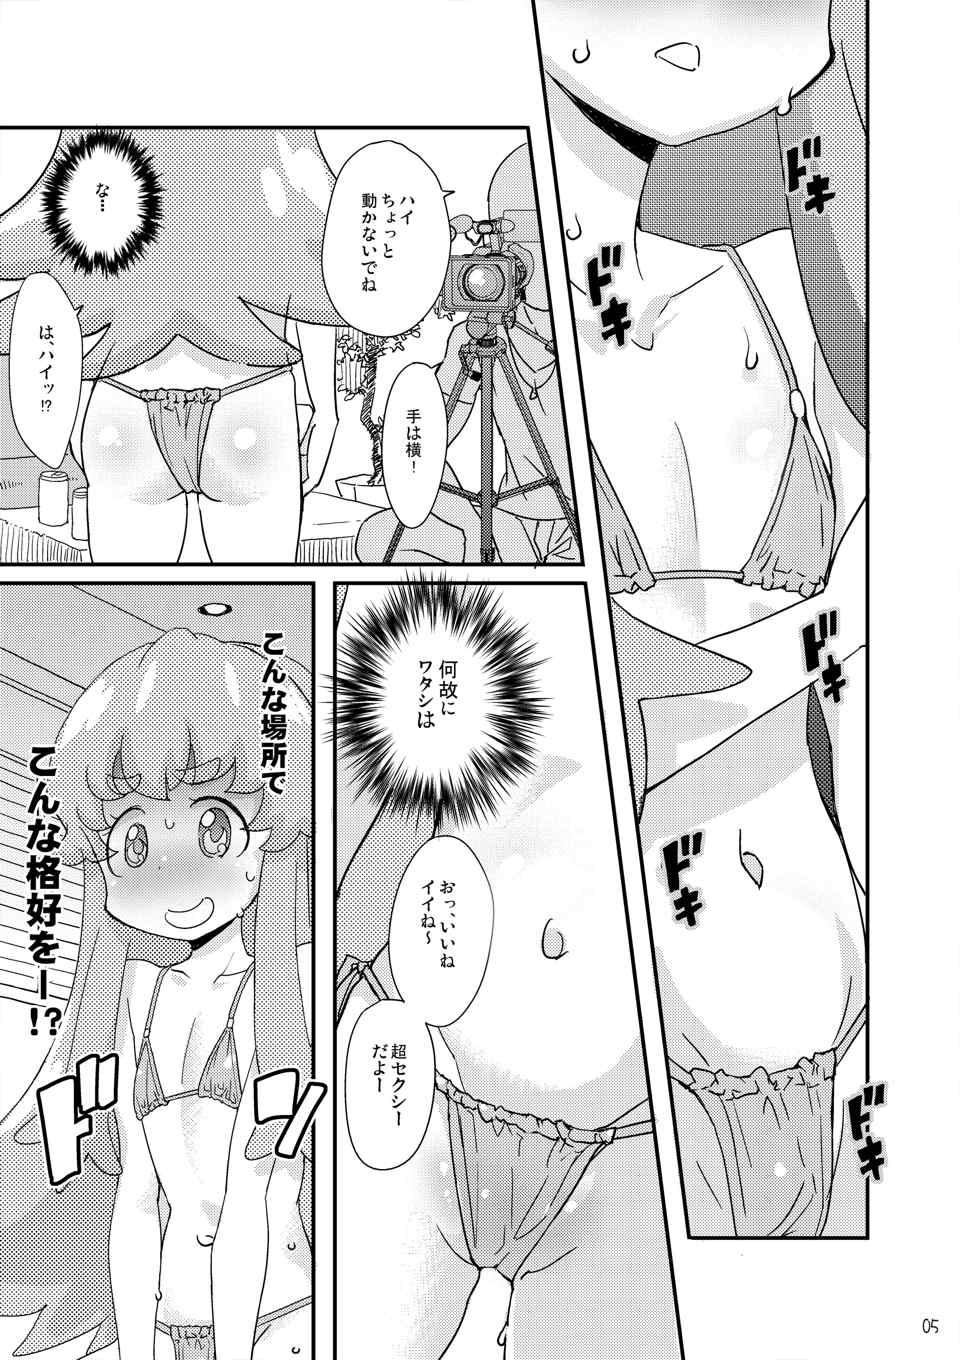 For HachaMecha Princess HiME-chan - Happinesscharge precure Jav - Page 5